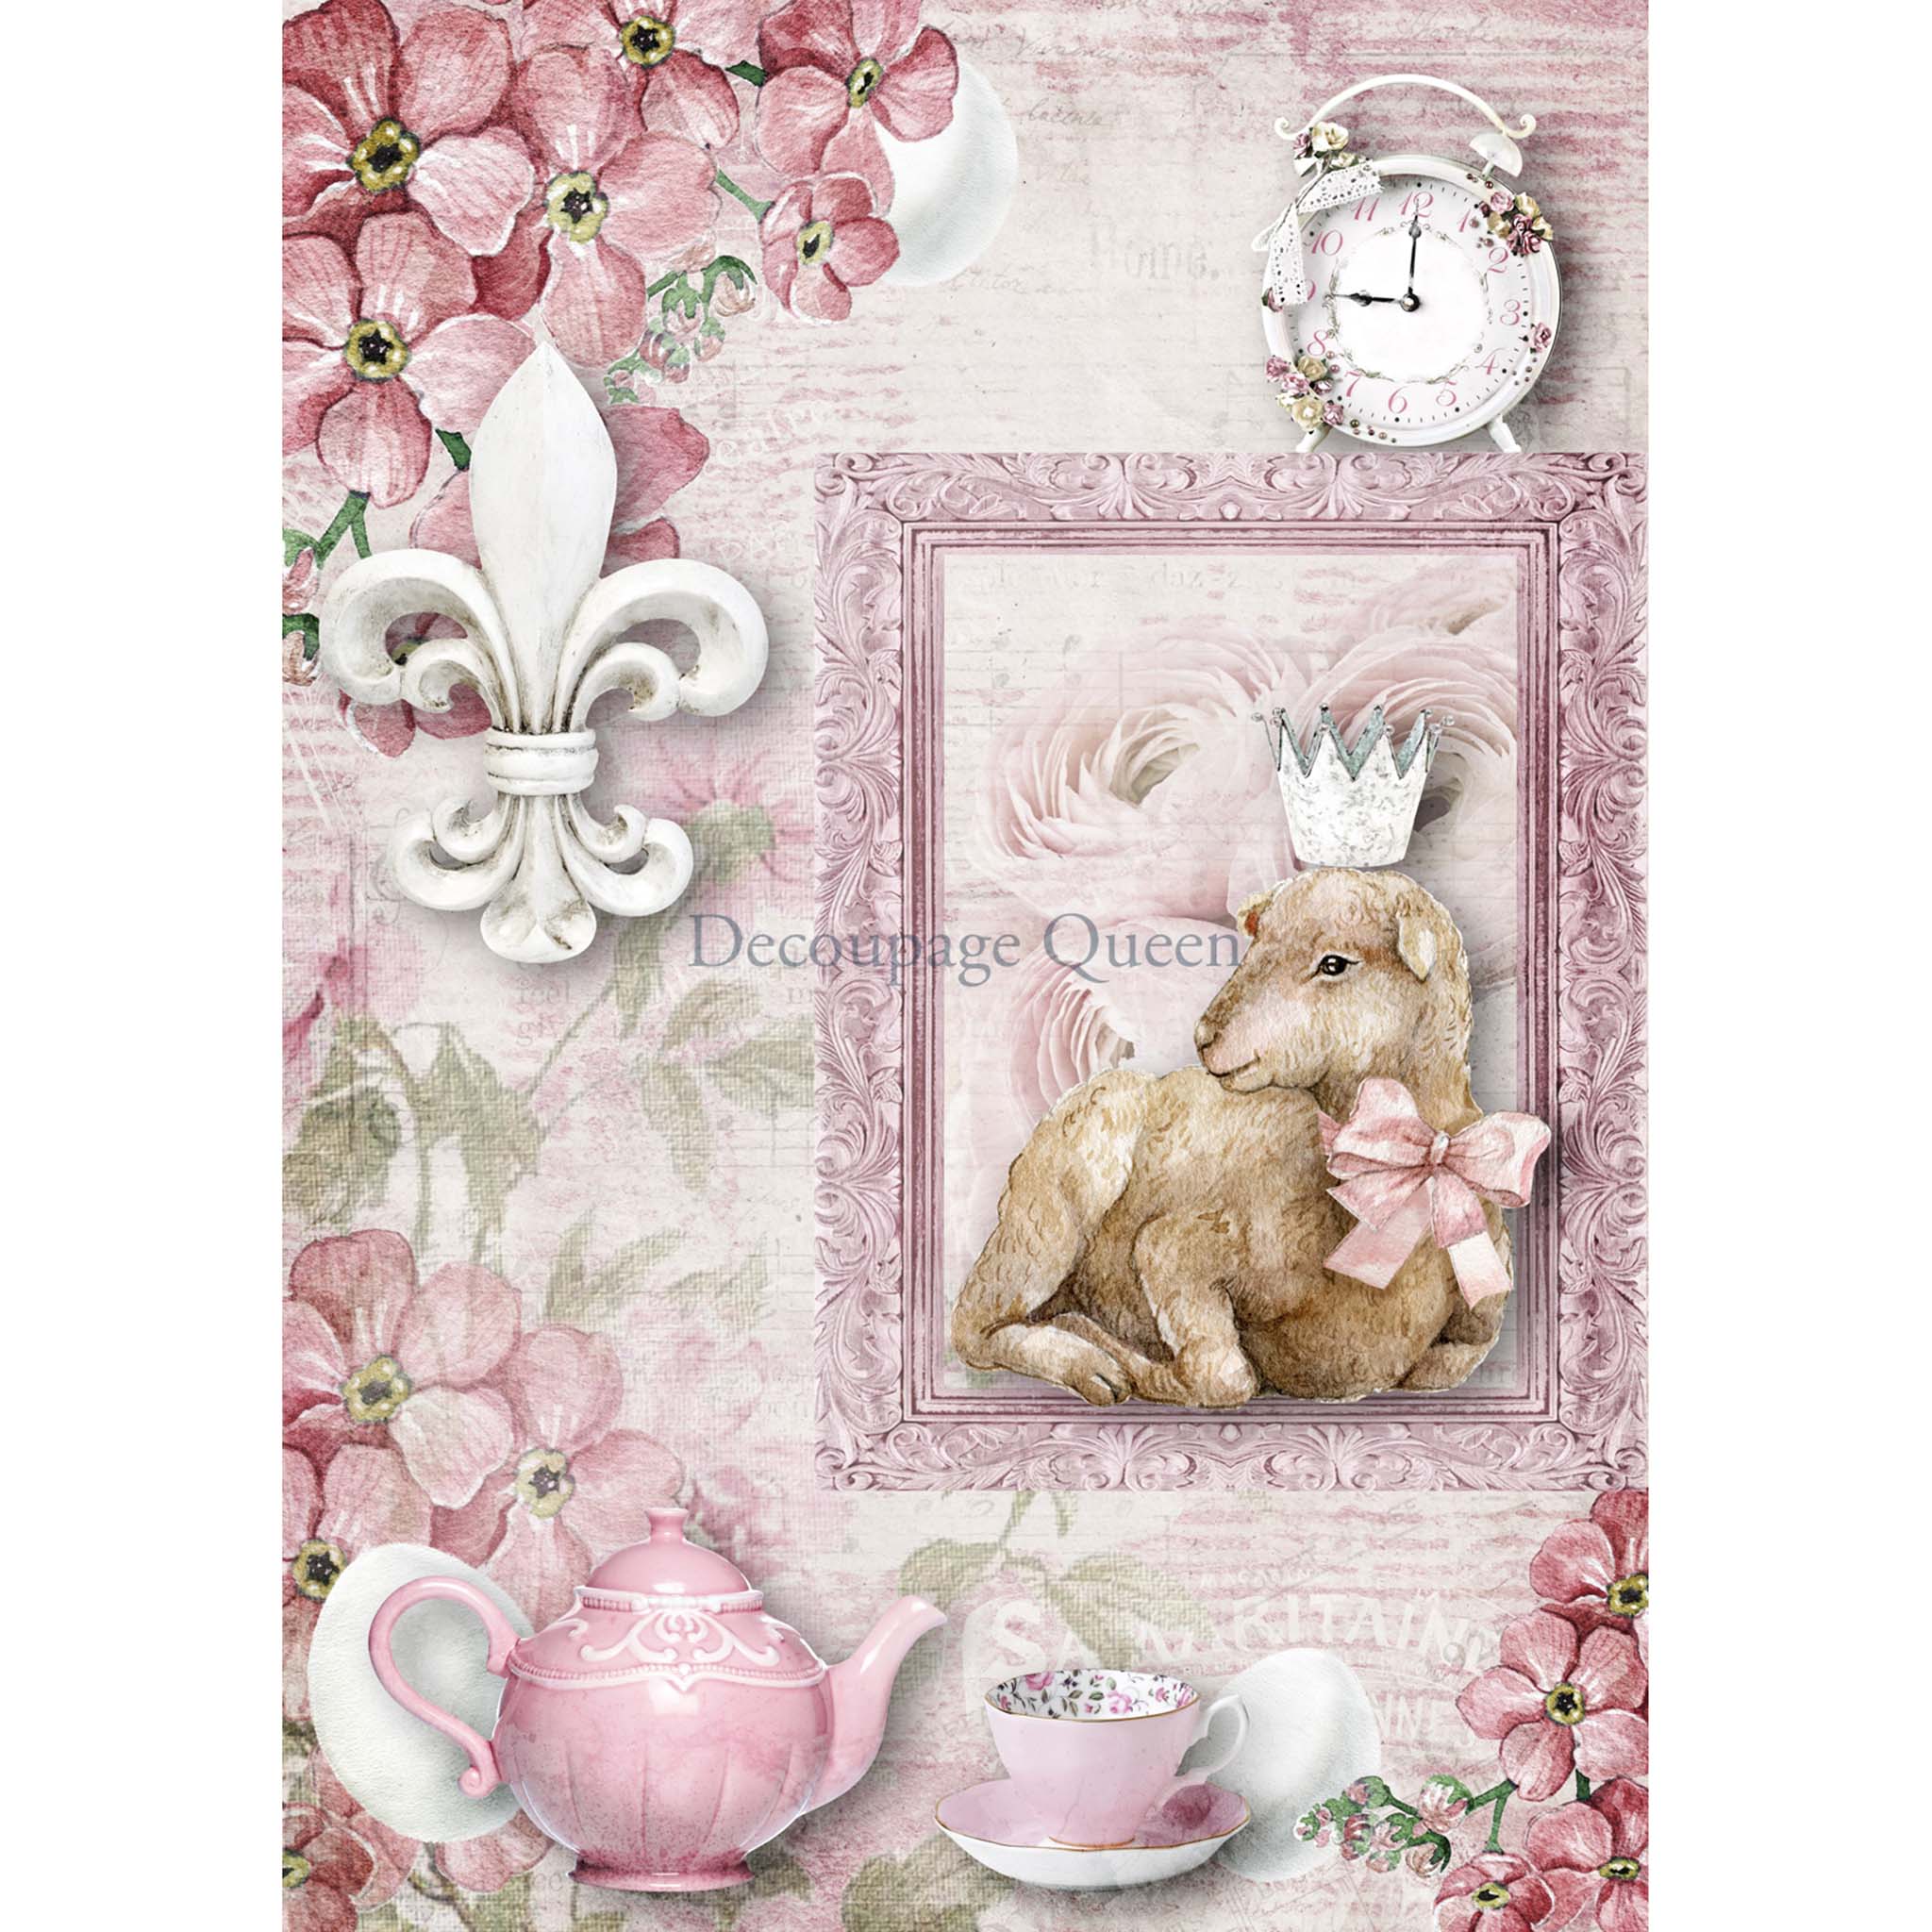 A3 rice paper design that features a pale pink background and adorable lamb with a crown and features fleur de lis, a clock, and a tea set with pink flowers. White borders are on the sides.